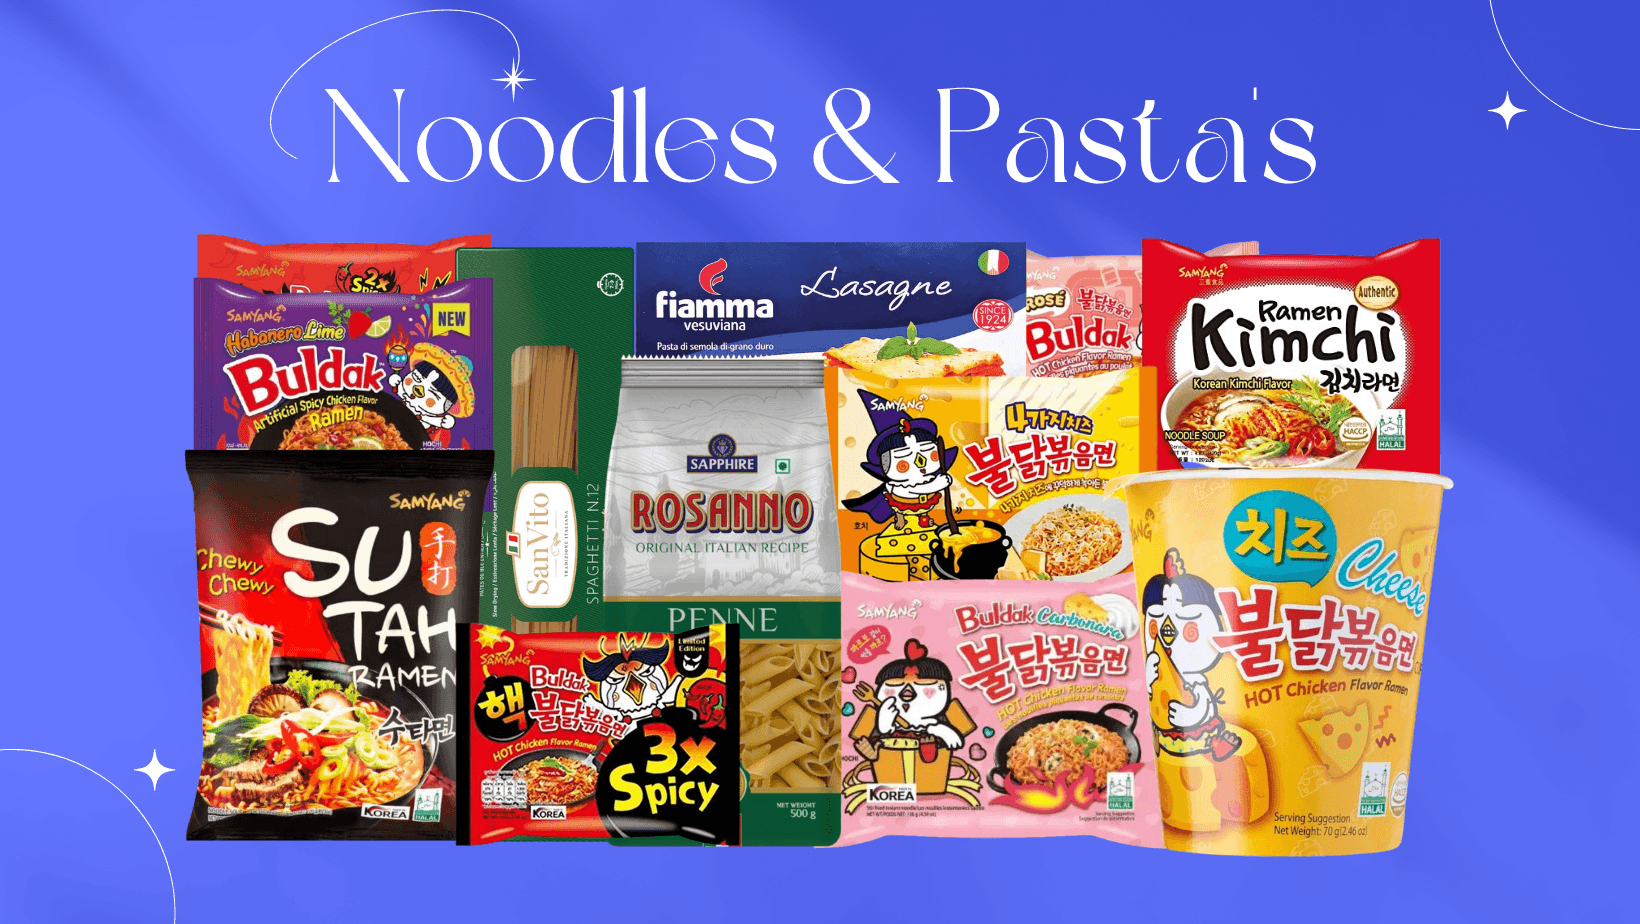 Noodles and Pasta's